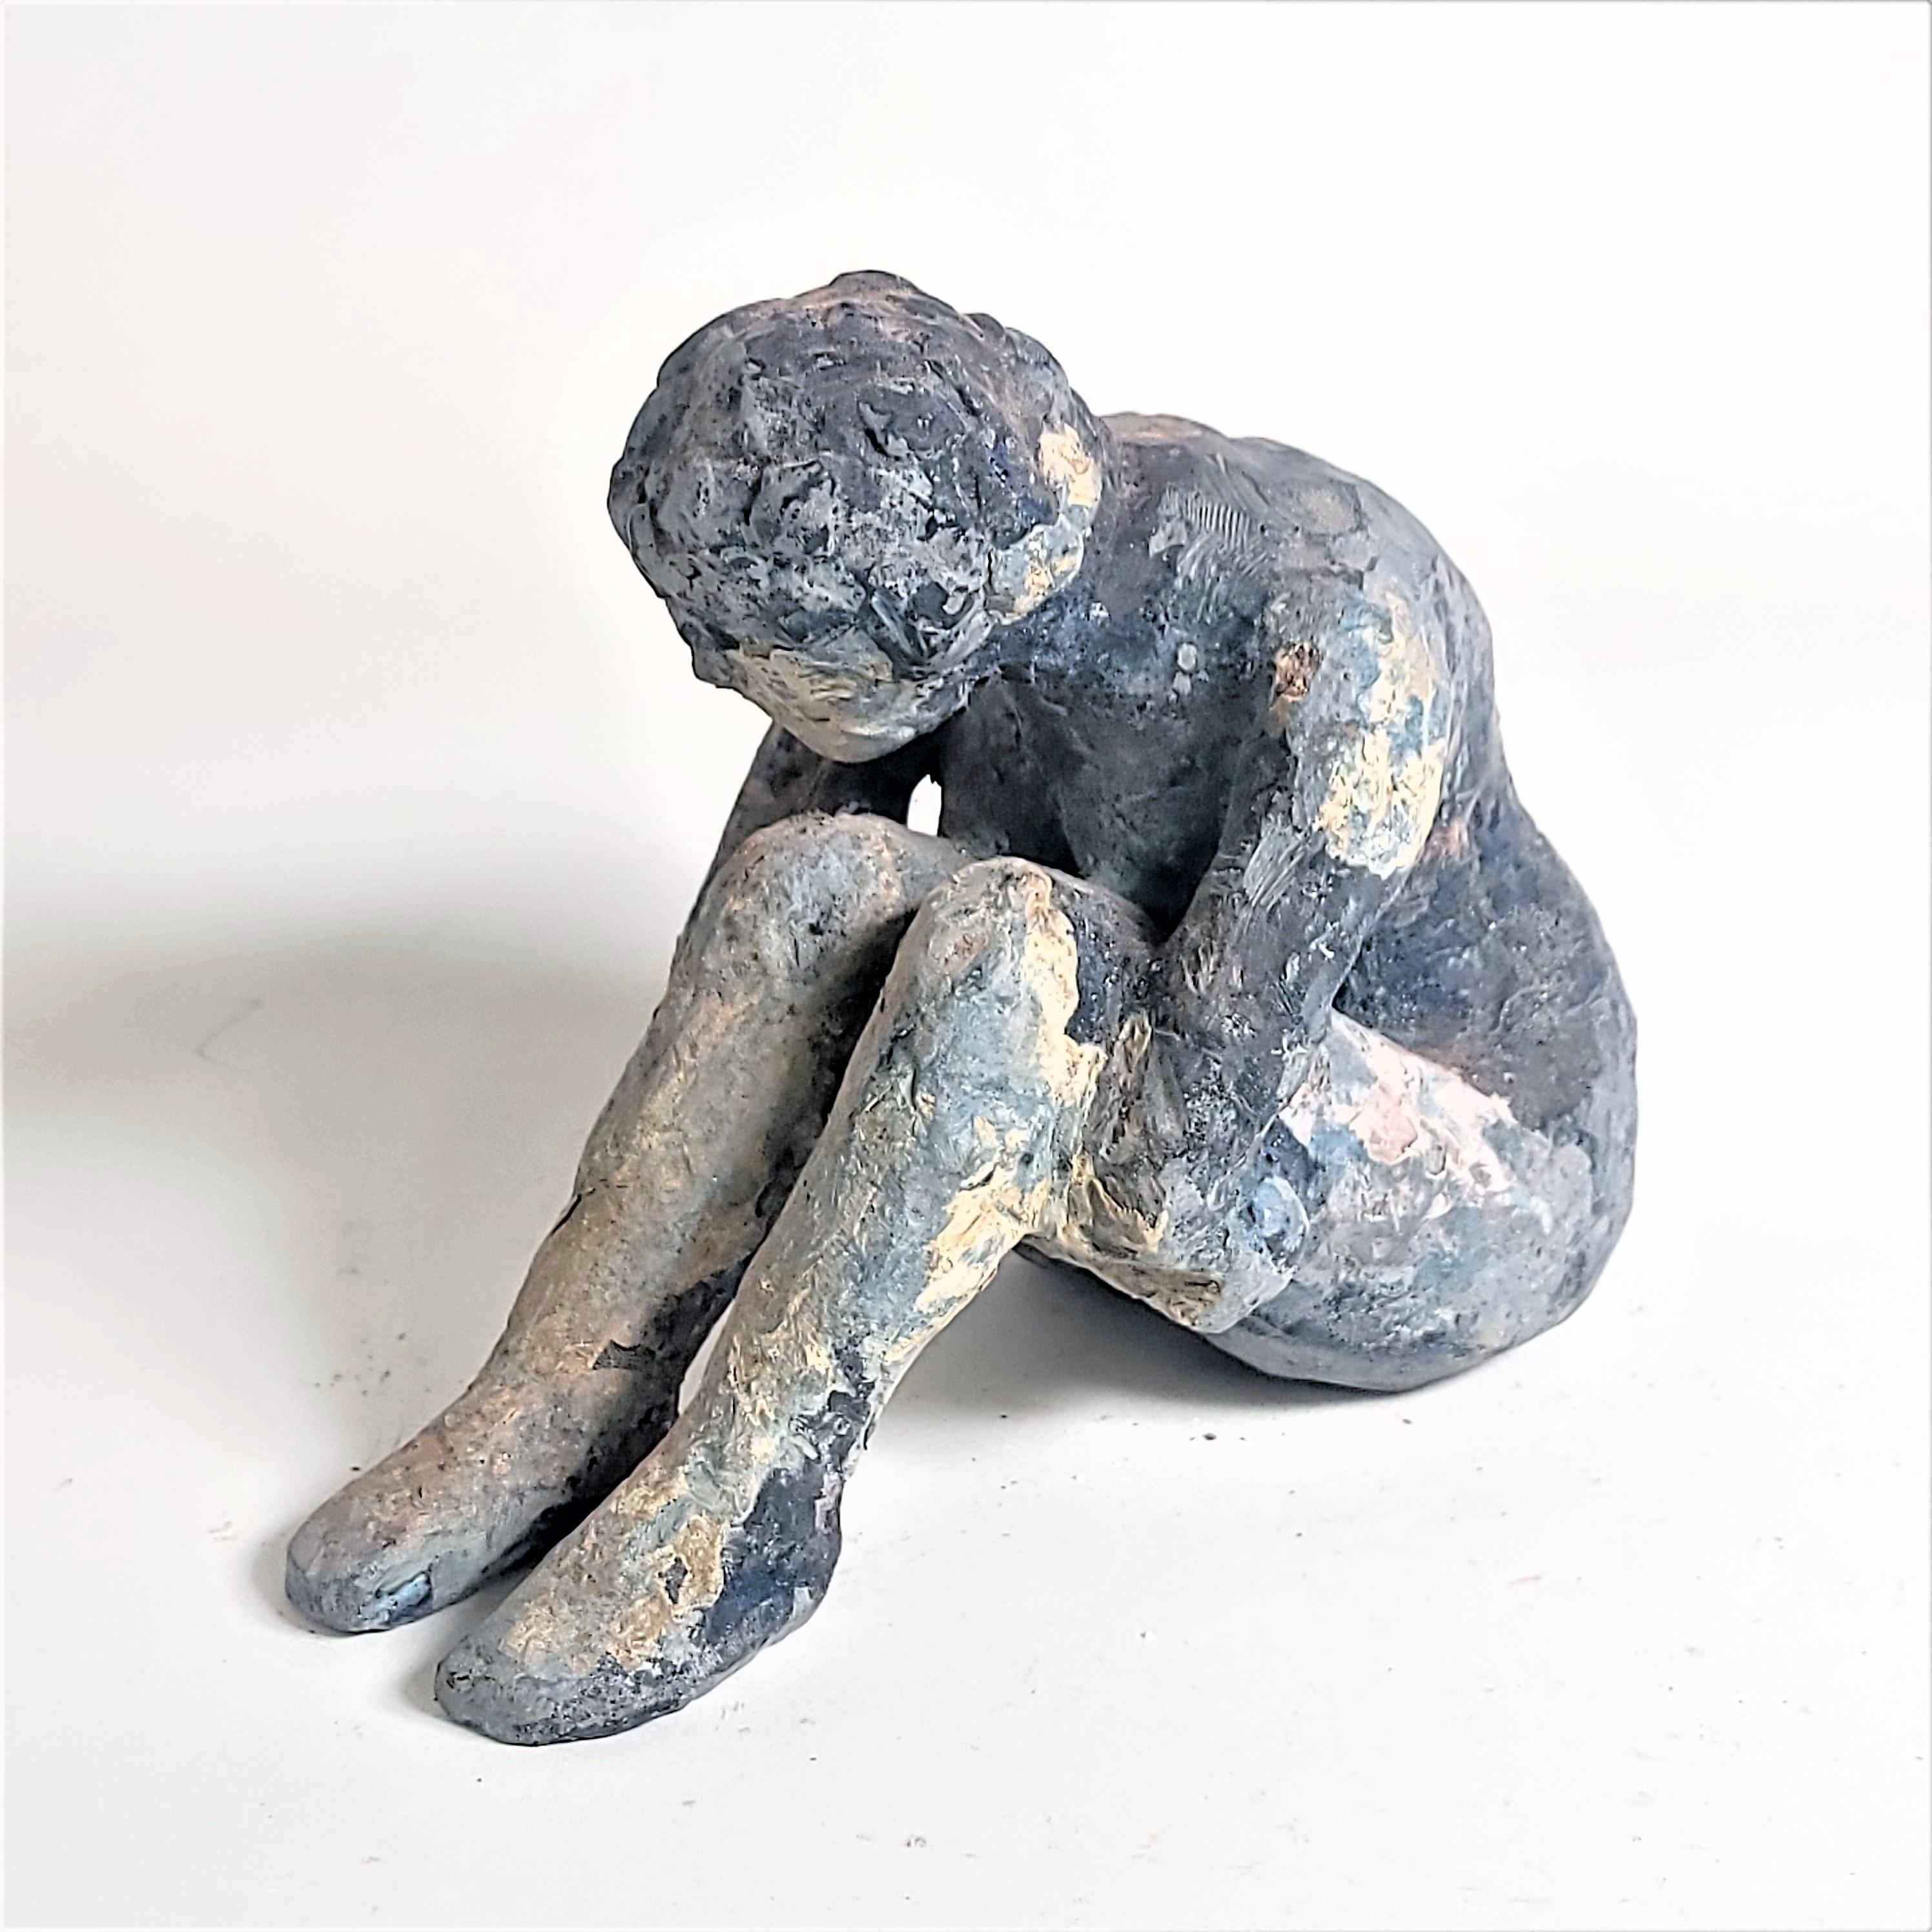 Figurative Small Sculpture, Blue, Grey, Brown

Unique Multiples - Up to 25 will be produced, each with the same form but different finishes: ground metals, dyes and patinas will be applied by hand, uniquely to each piece.

Garth Evans is considered